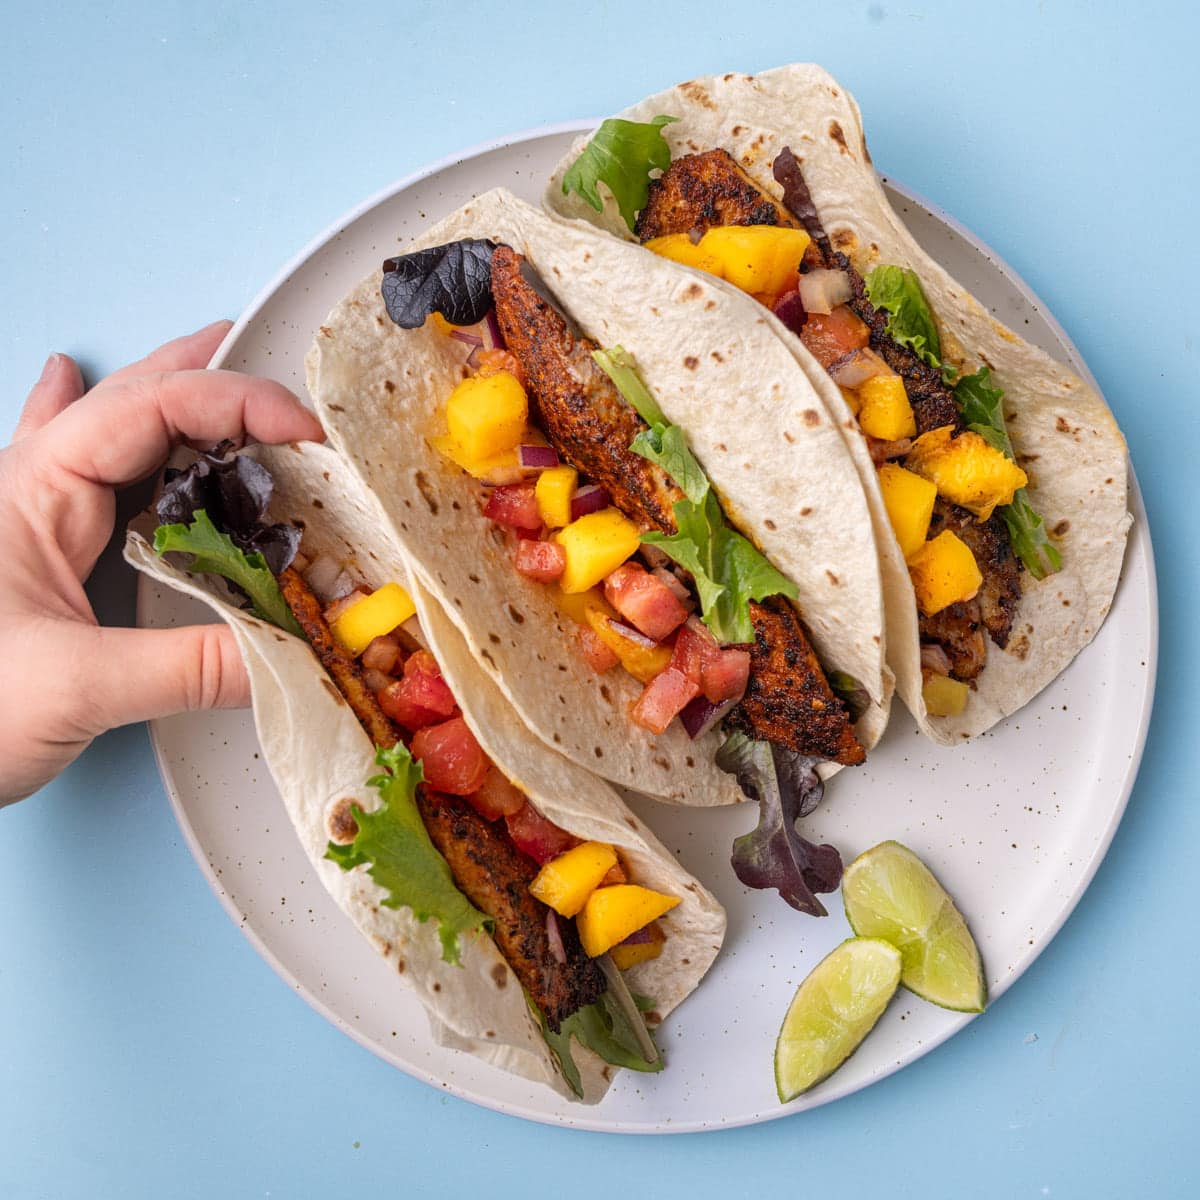 Three fish tacos with mango salsa on a plate, with hand reaching in to grab one.